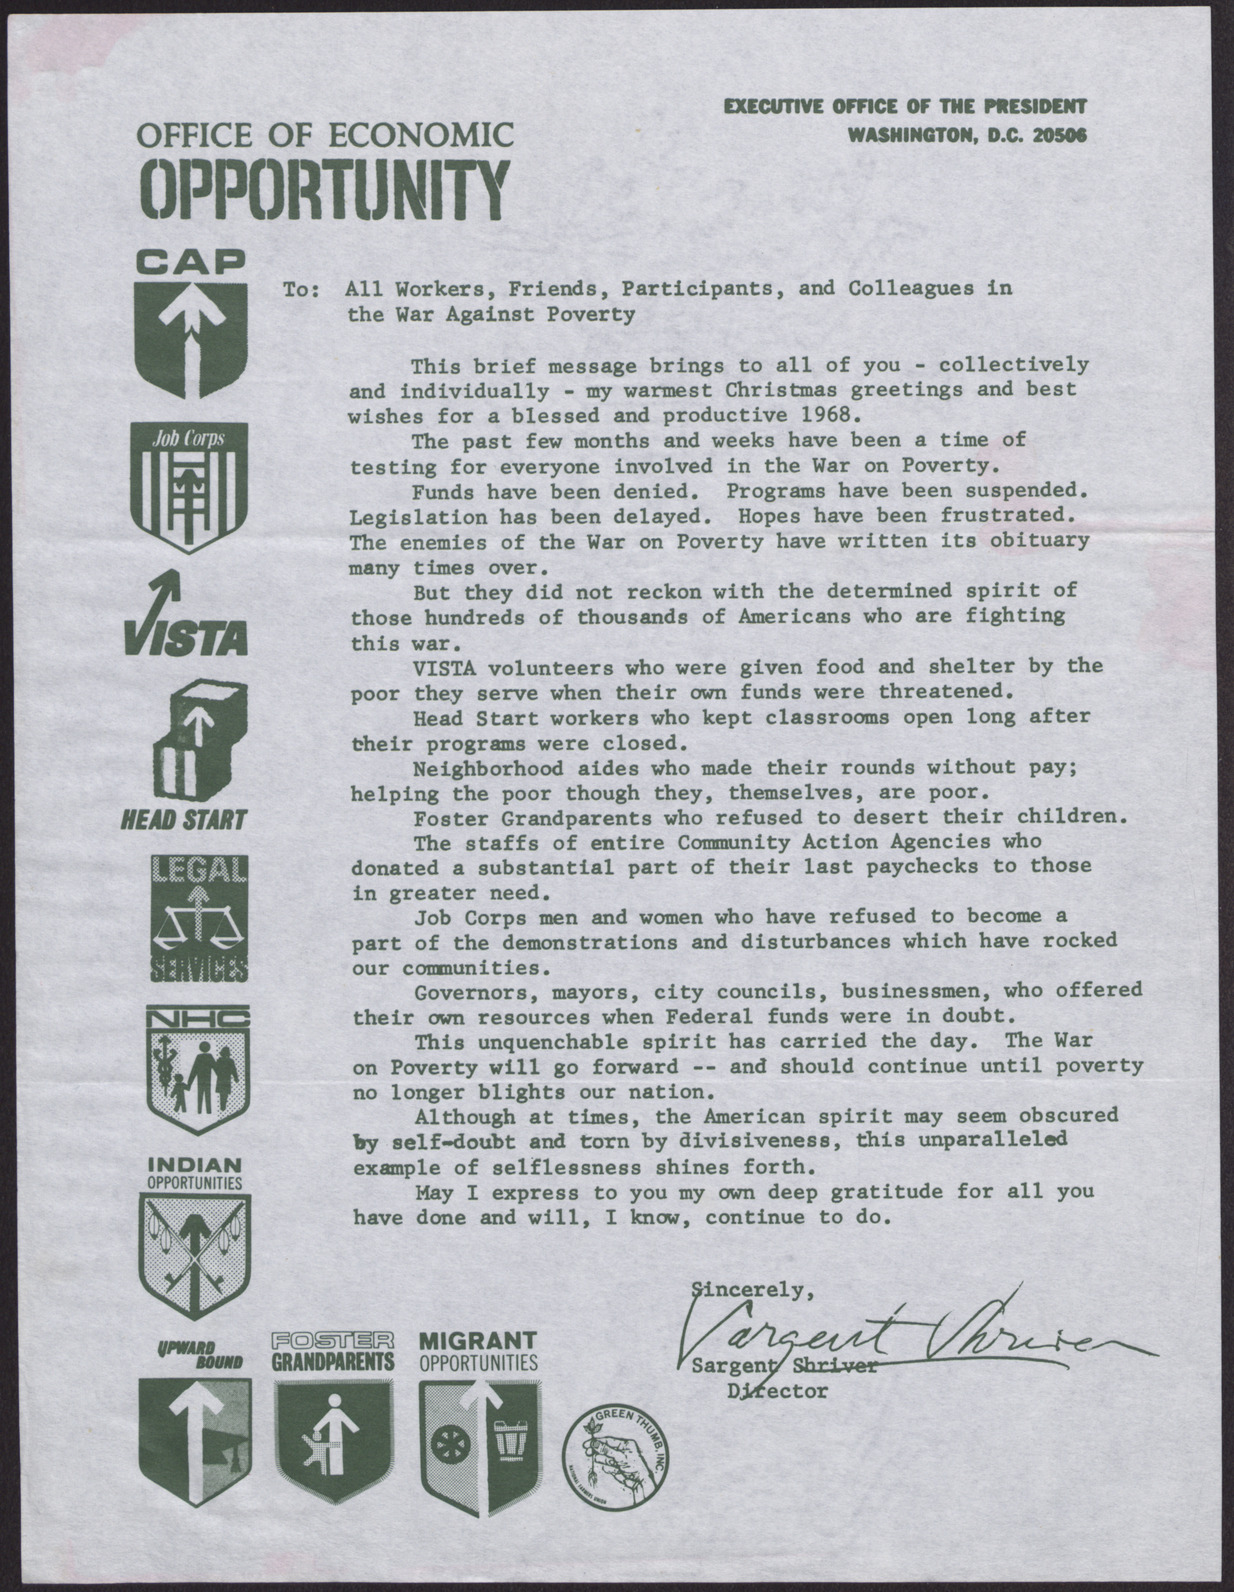 Letter from Sargent Shriver on behalf of the Office of Economic Opportunity, no date